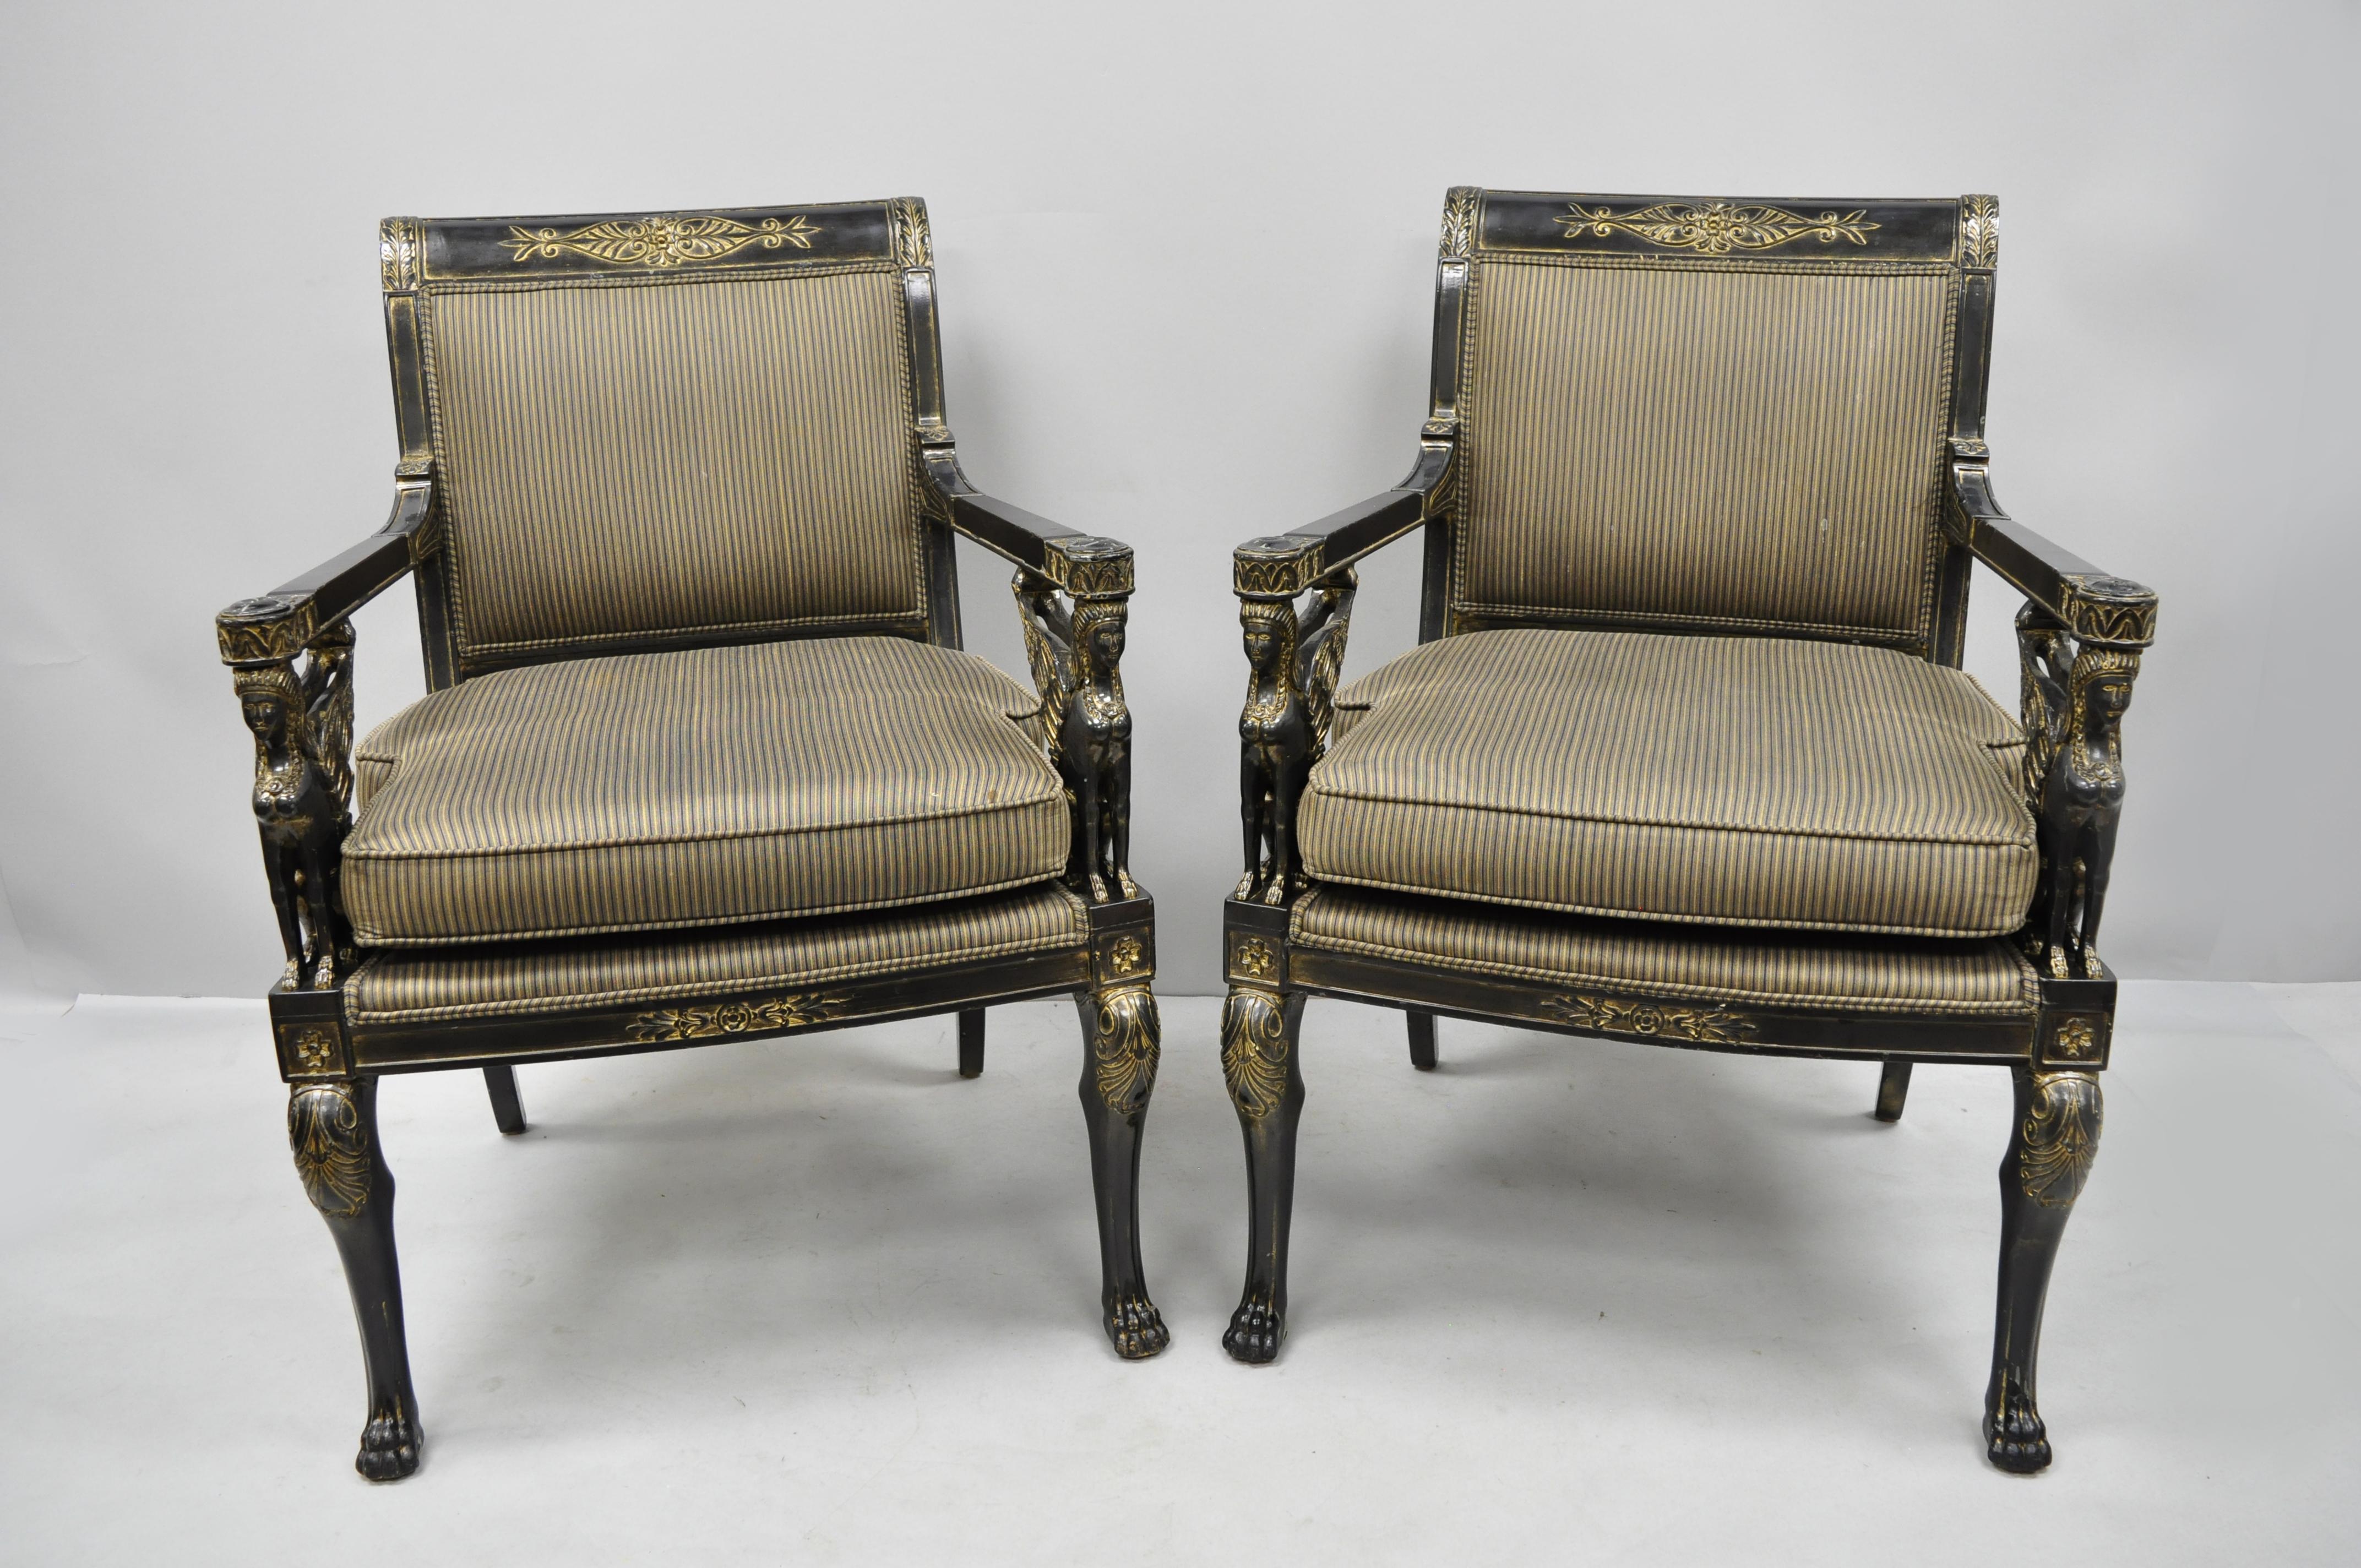 American Pair of French Empire Regency Black Lacquer Chairs with Sphinx Figures, Lambert